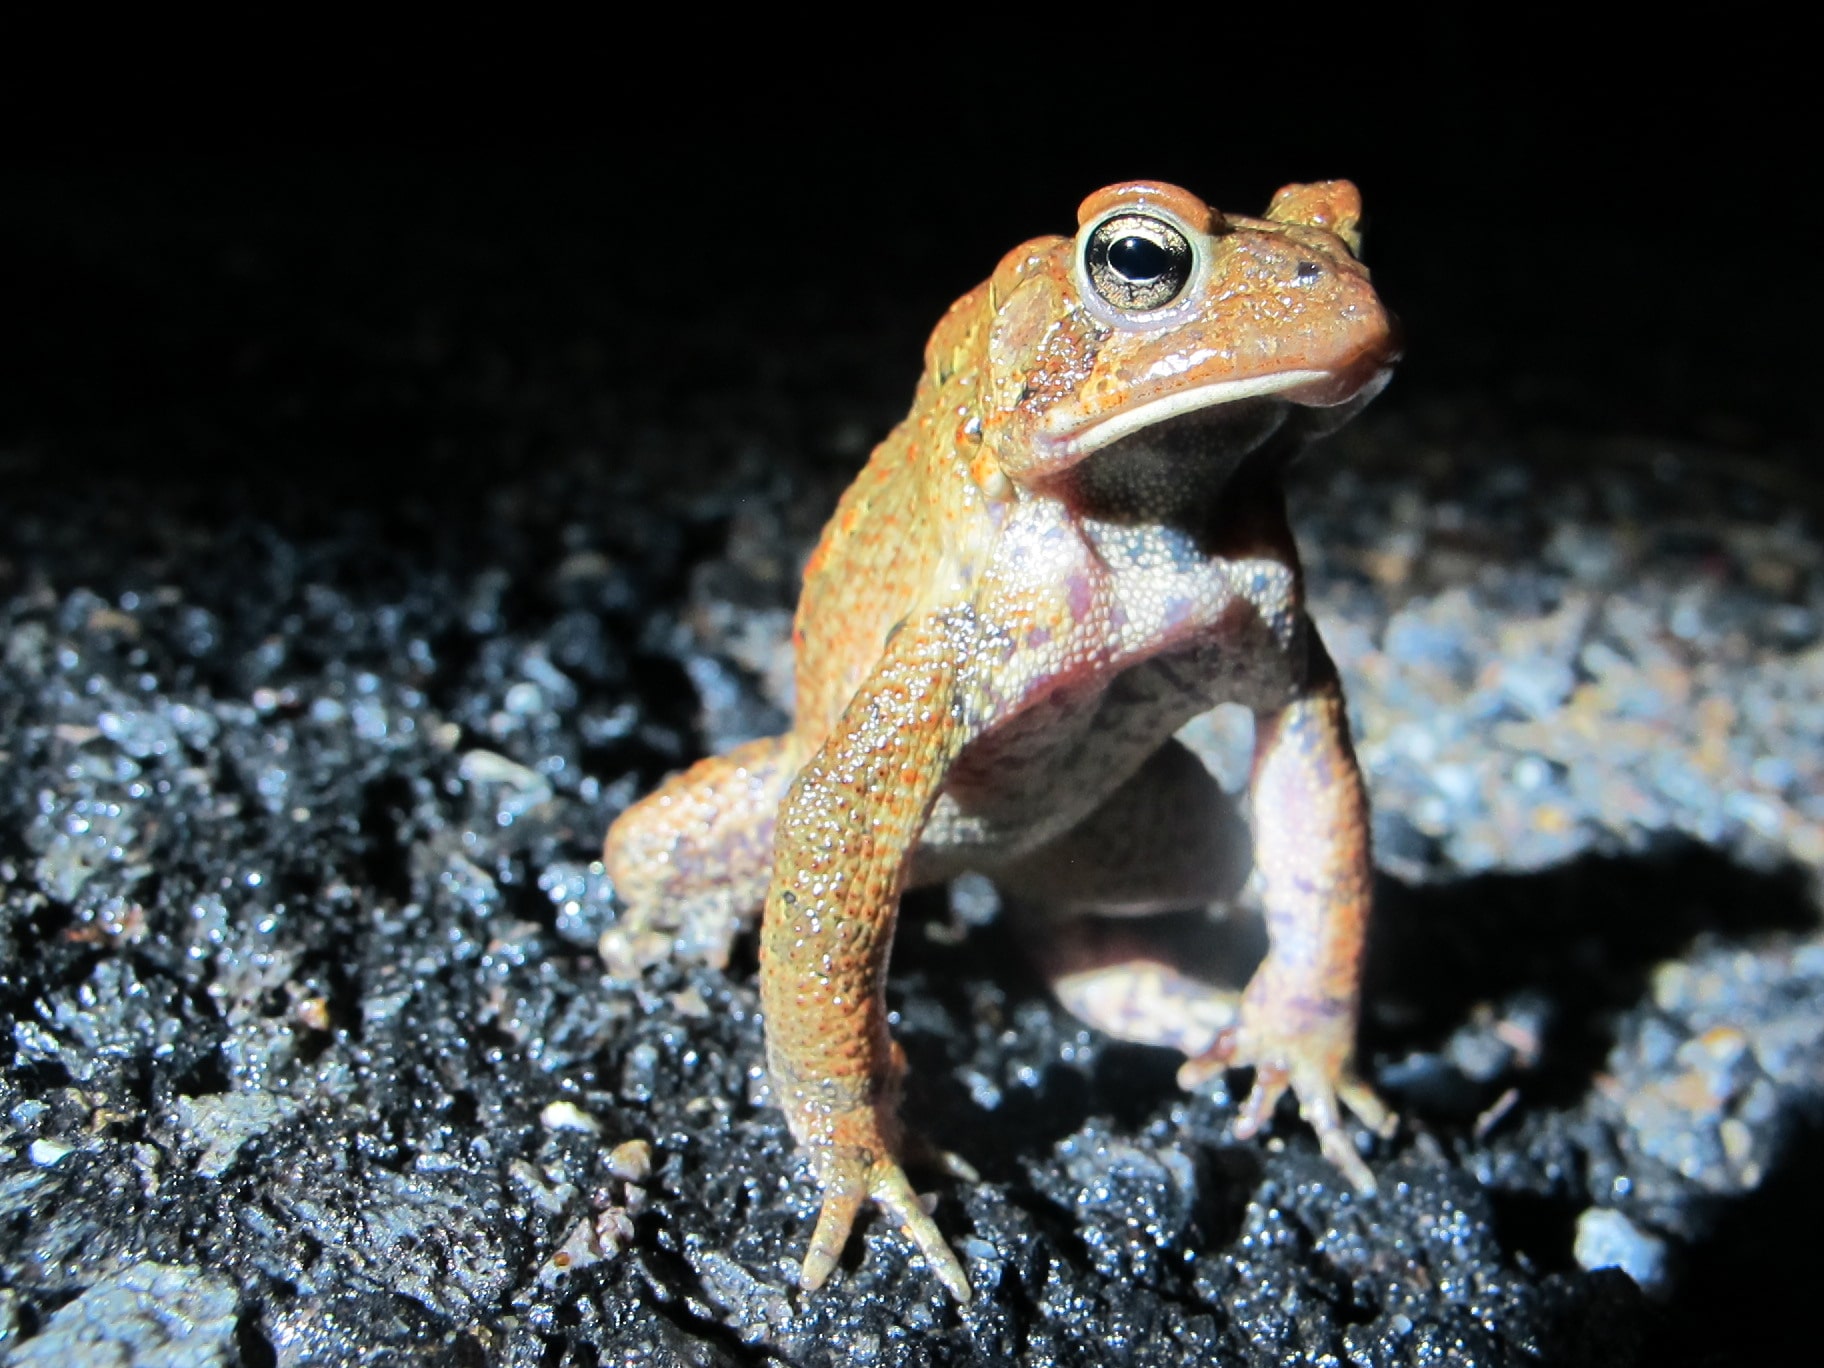 A toad gives a sideways glance. (photo © Brett Amy Thelen)